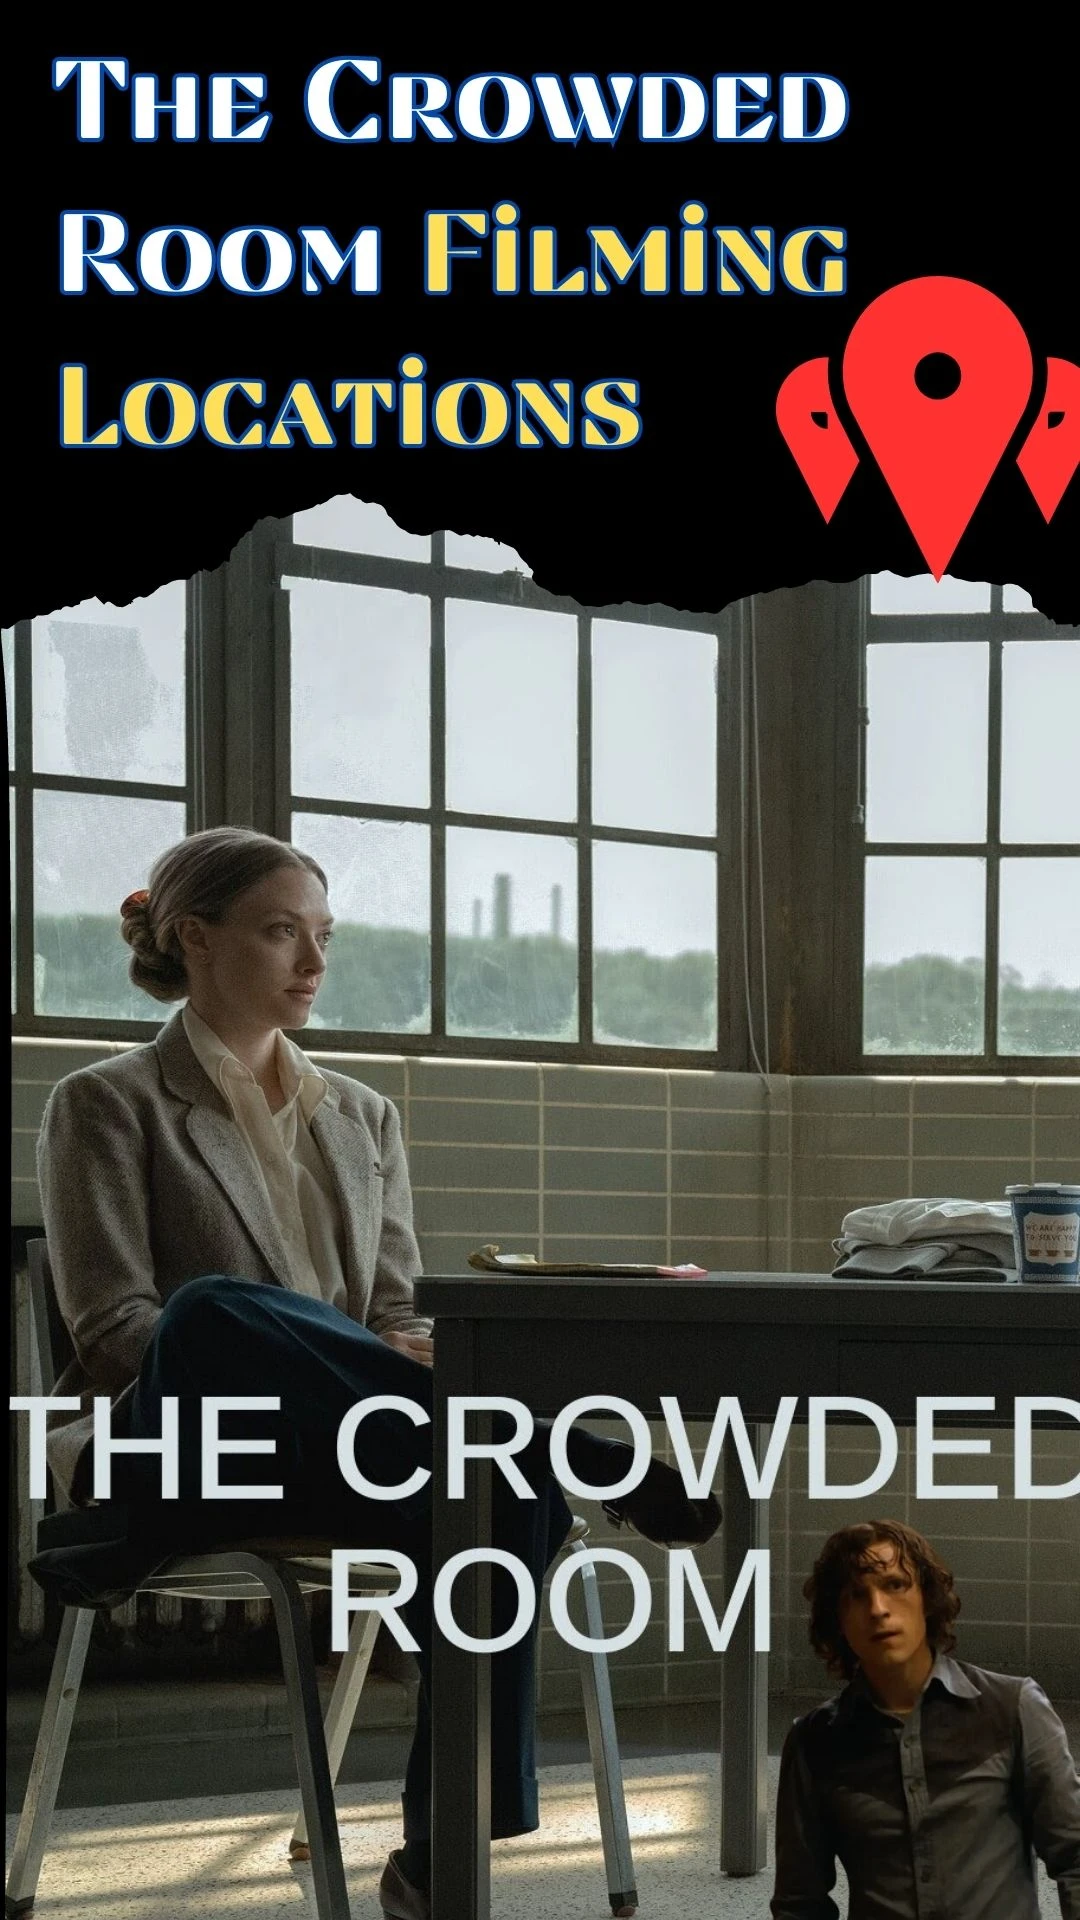 The Crowded Room Filming Locations